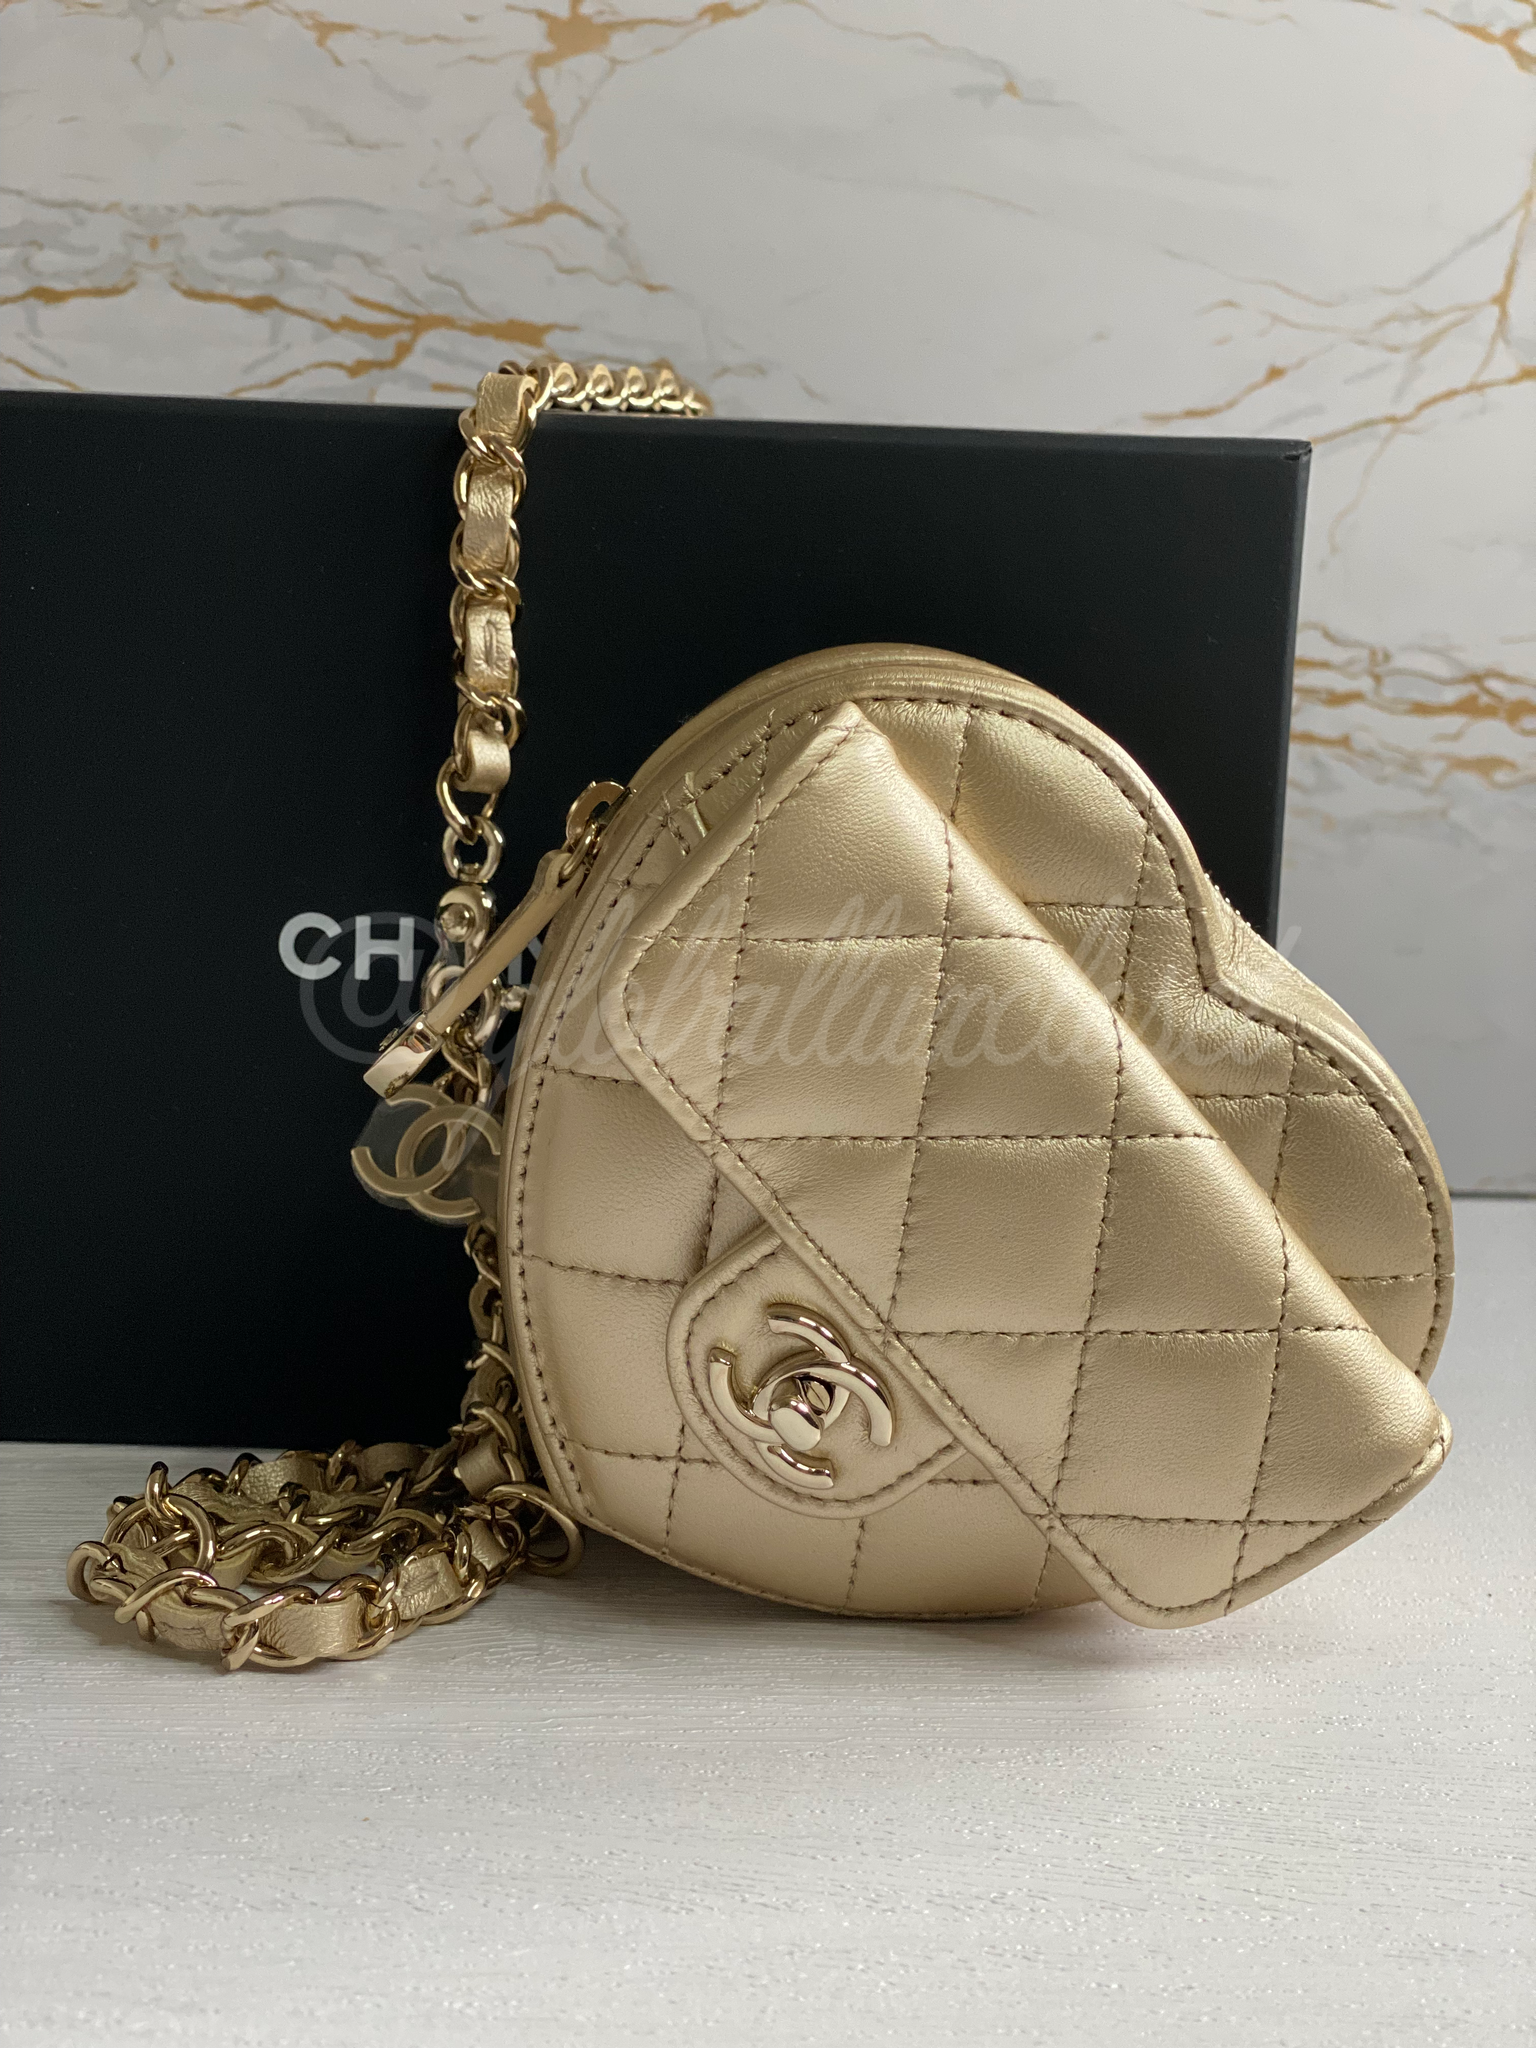 CHANEL 22S HEART CLUTCH WITH CHAIN IN CORAL PINK LAMBSKIN